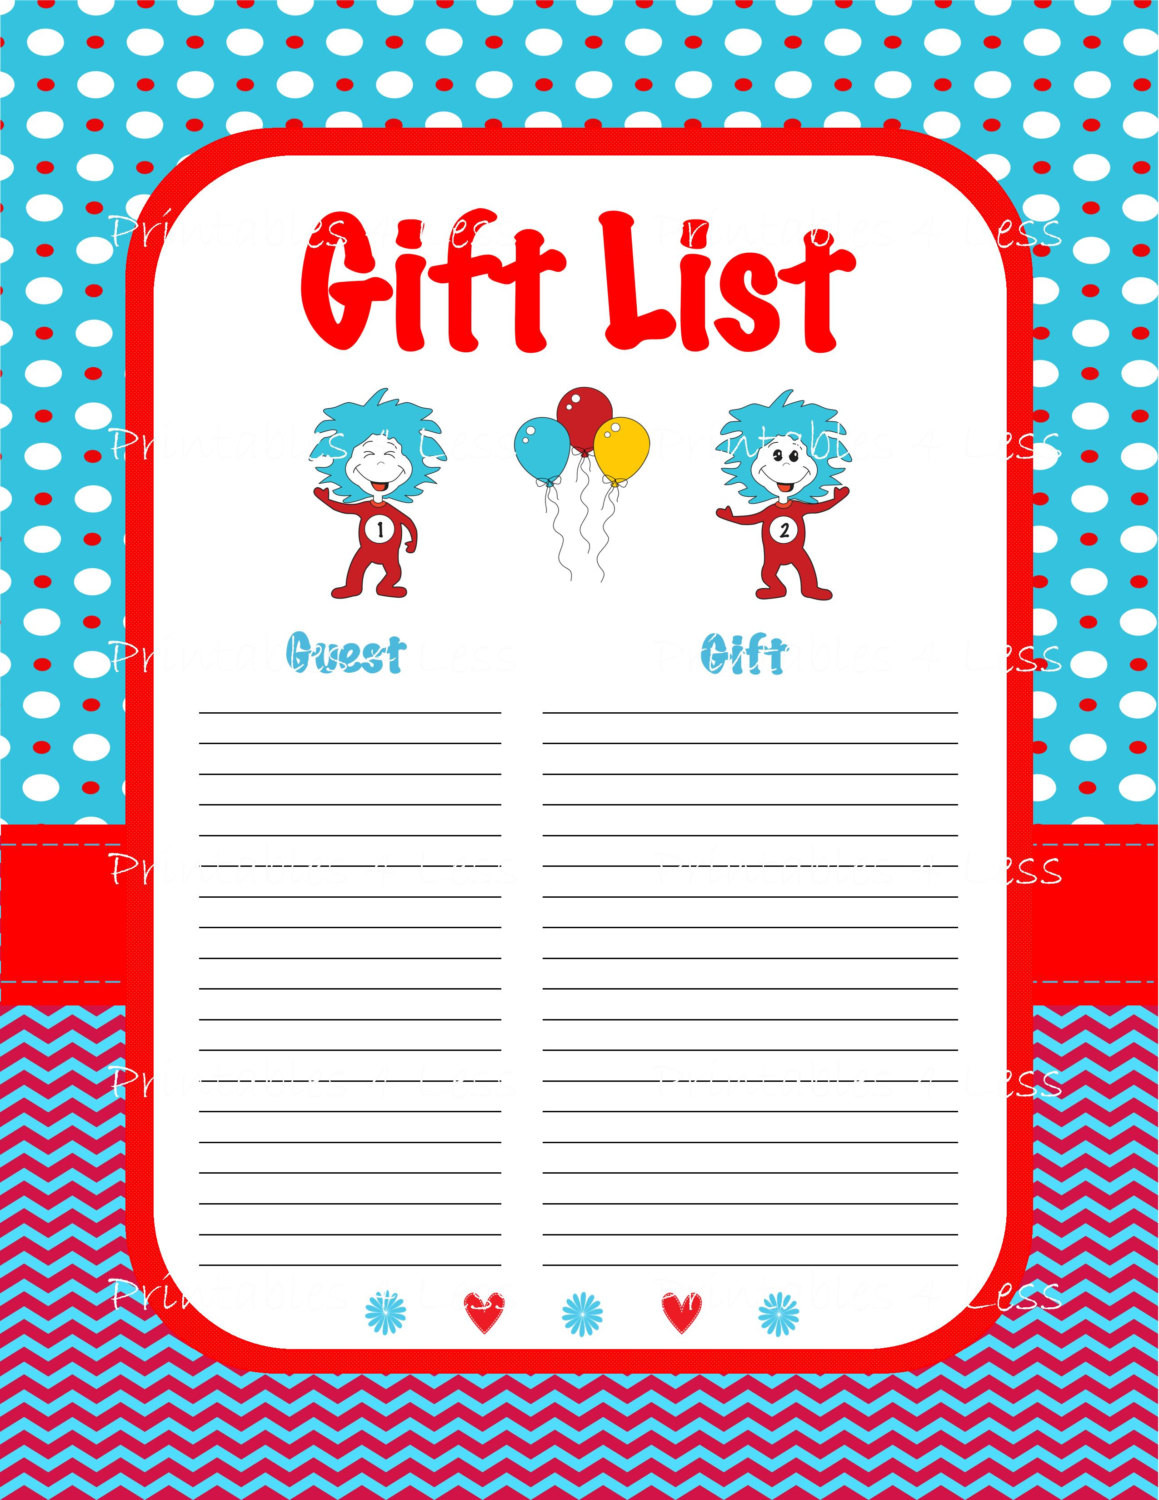 Dr.Seuss Baby Shower Gifts
 Dr Seuss Gift List Baby Shower Printable Guest Gift List